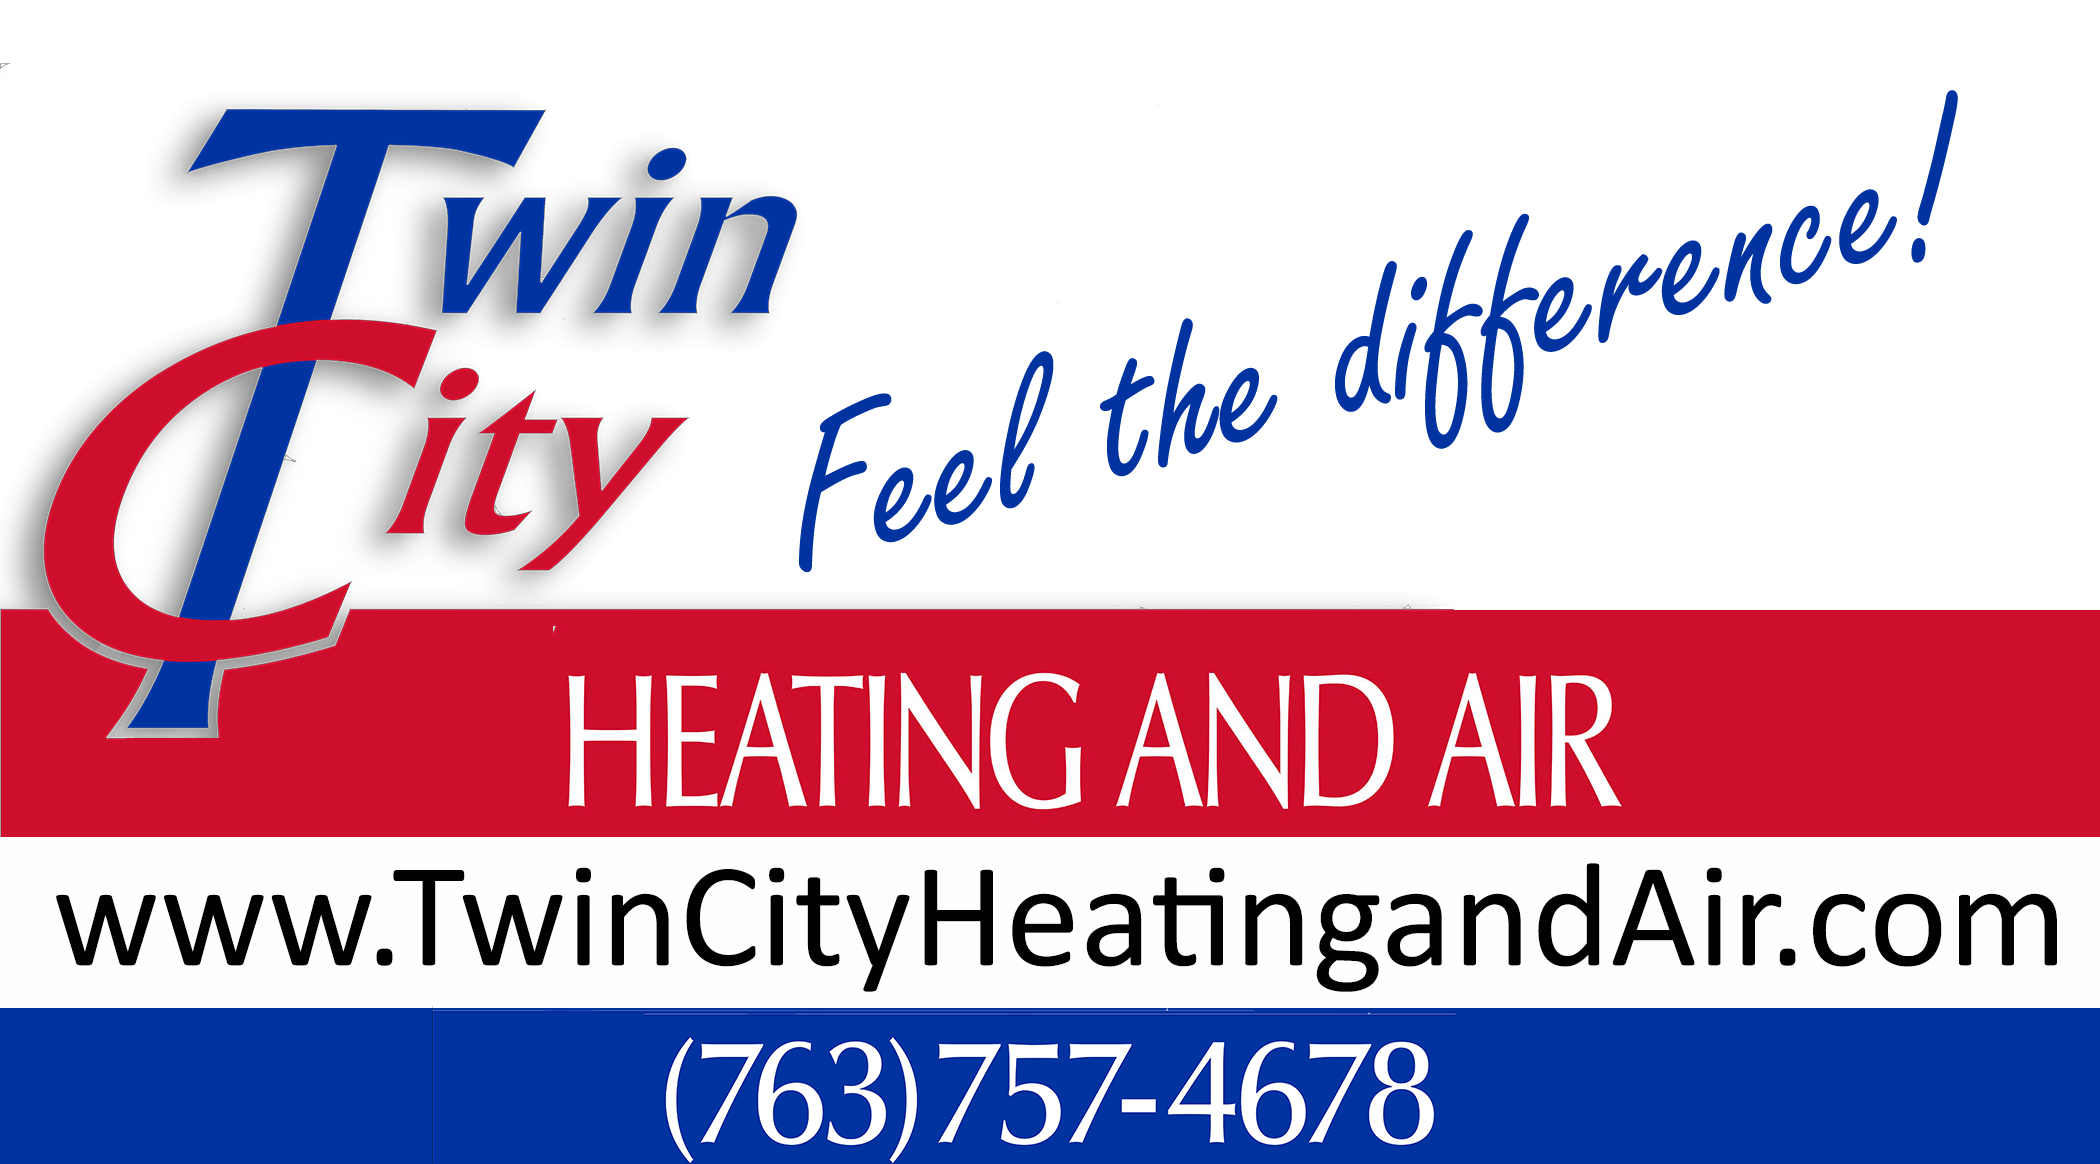 Twin City Heating and Air Feel the difference Logo with web.png